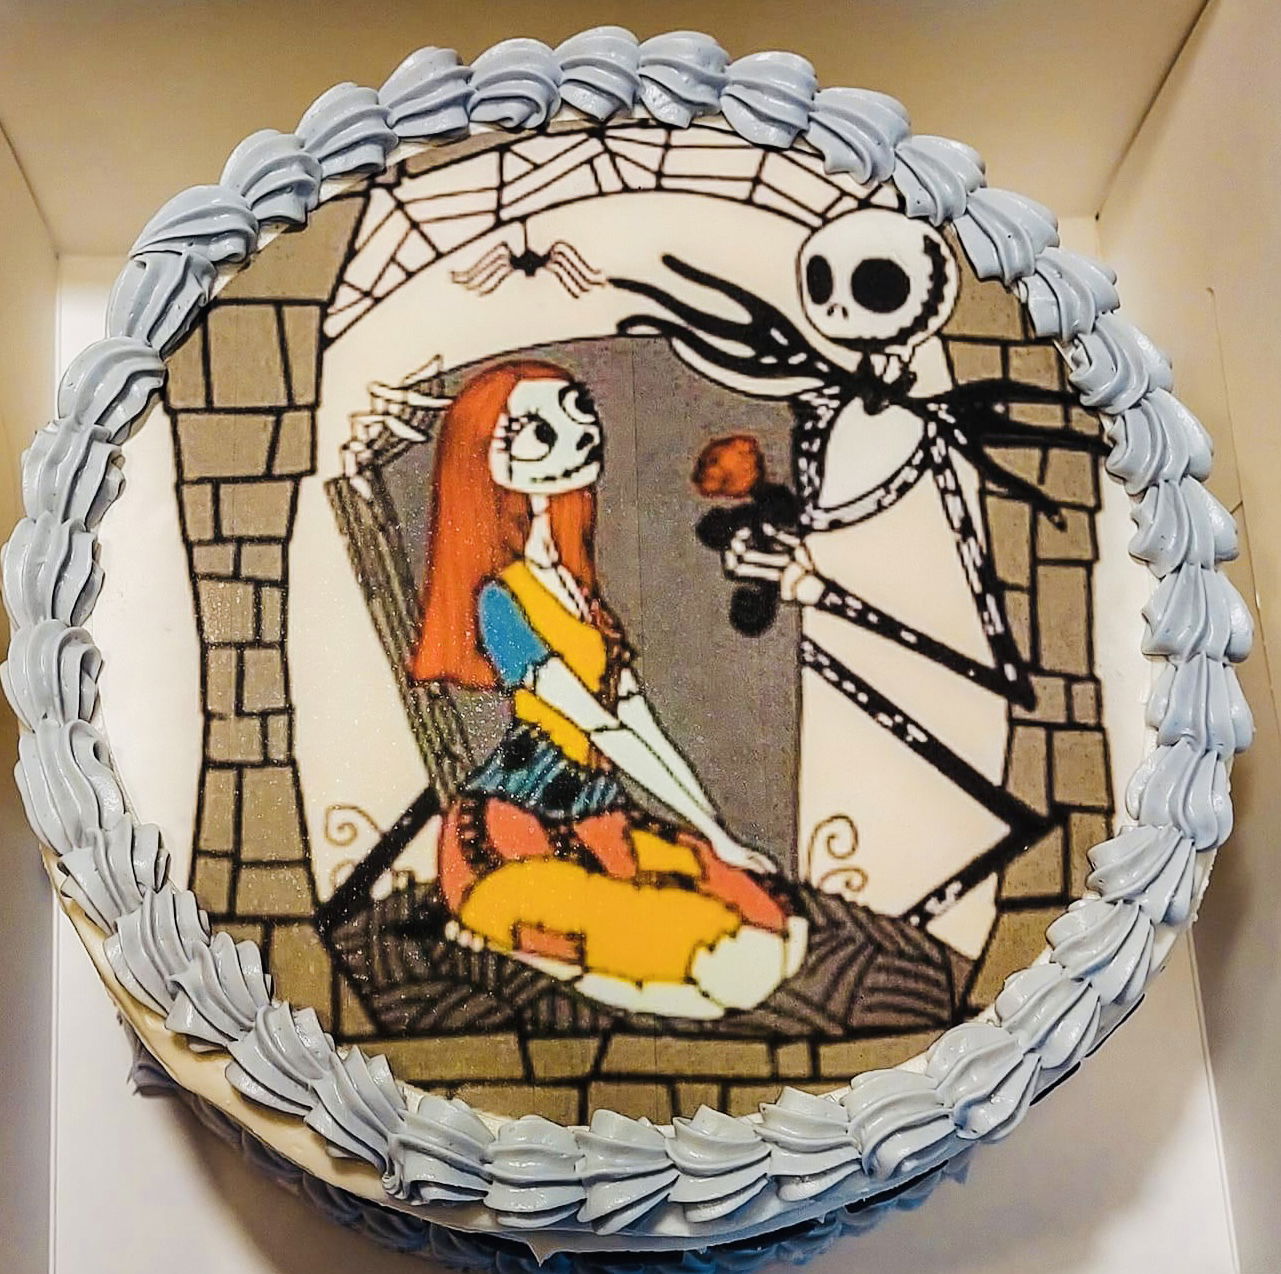 2 Layer Chocolate Nightmare Before Christmas Birthday Cake with Buttercream Frosting and Edible Image